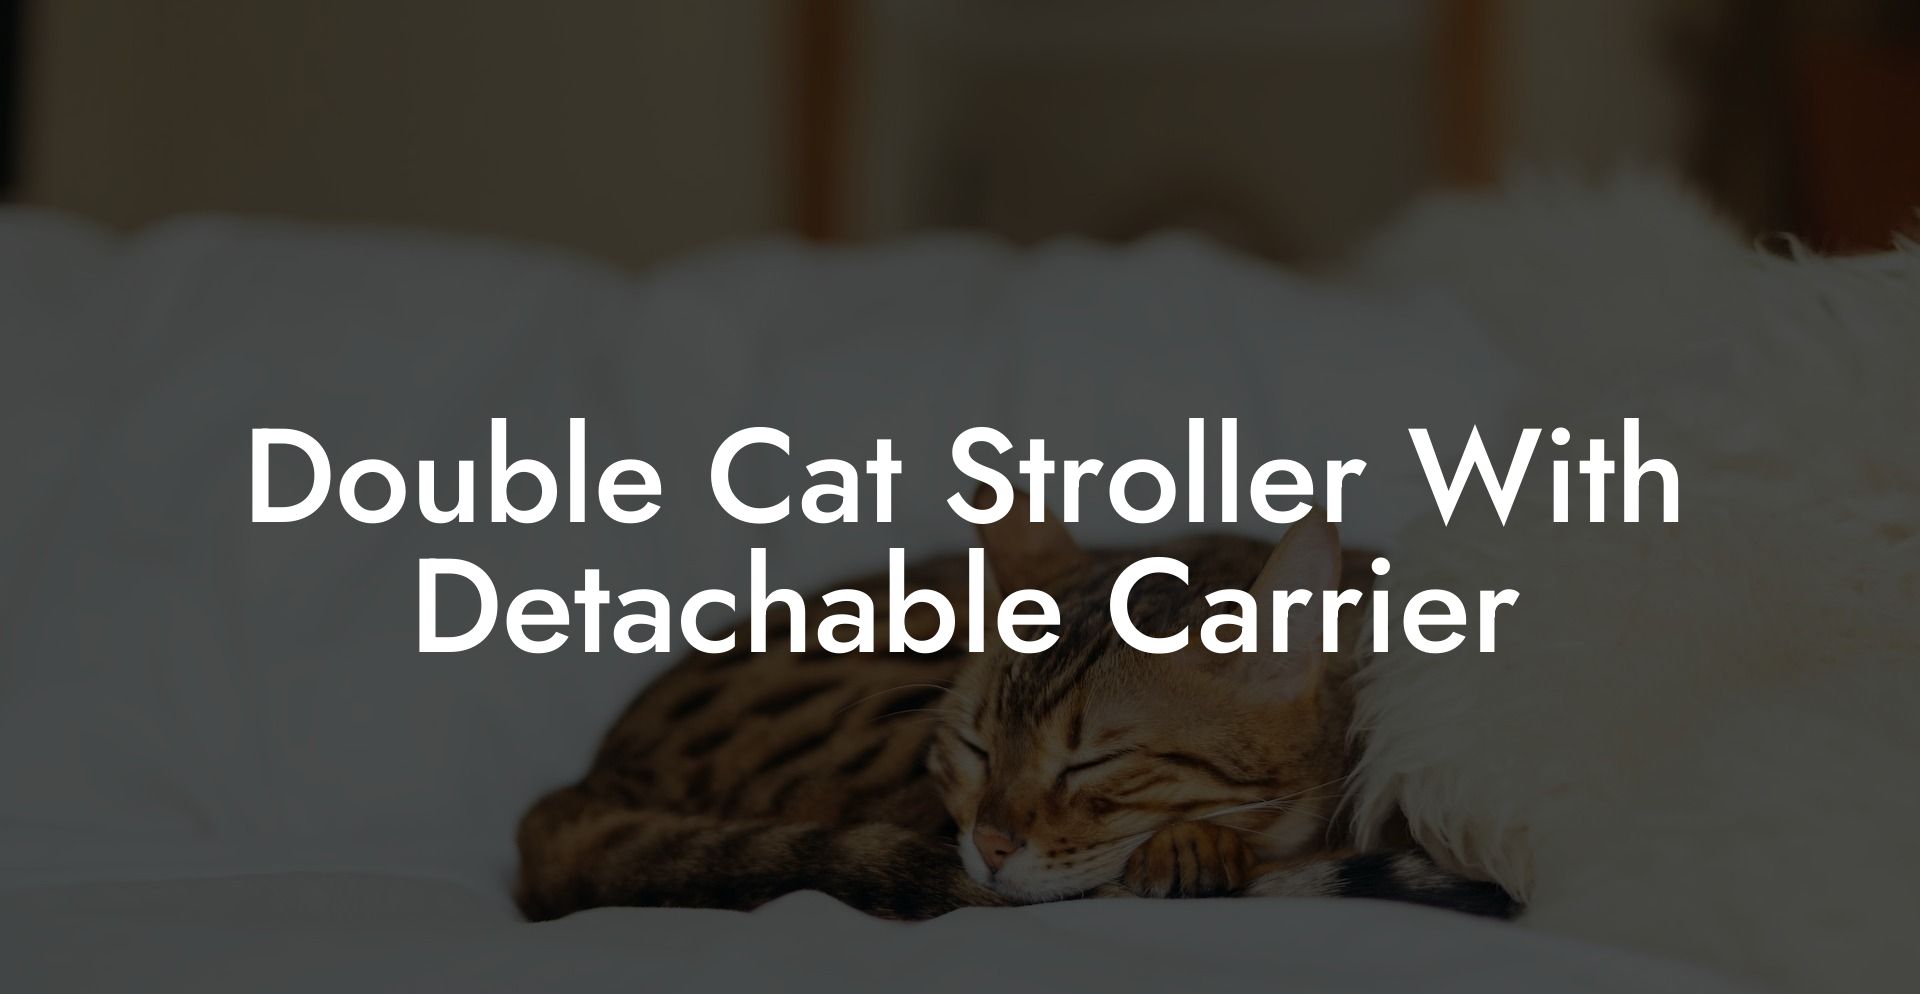 Double Cat Stroller With Detachable Carrier